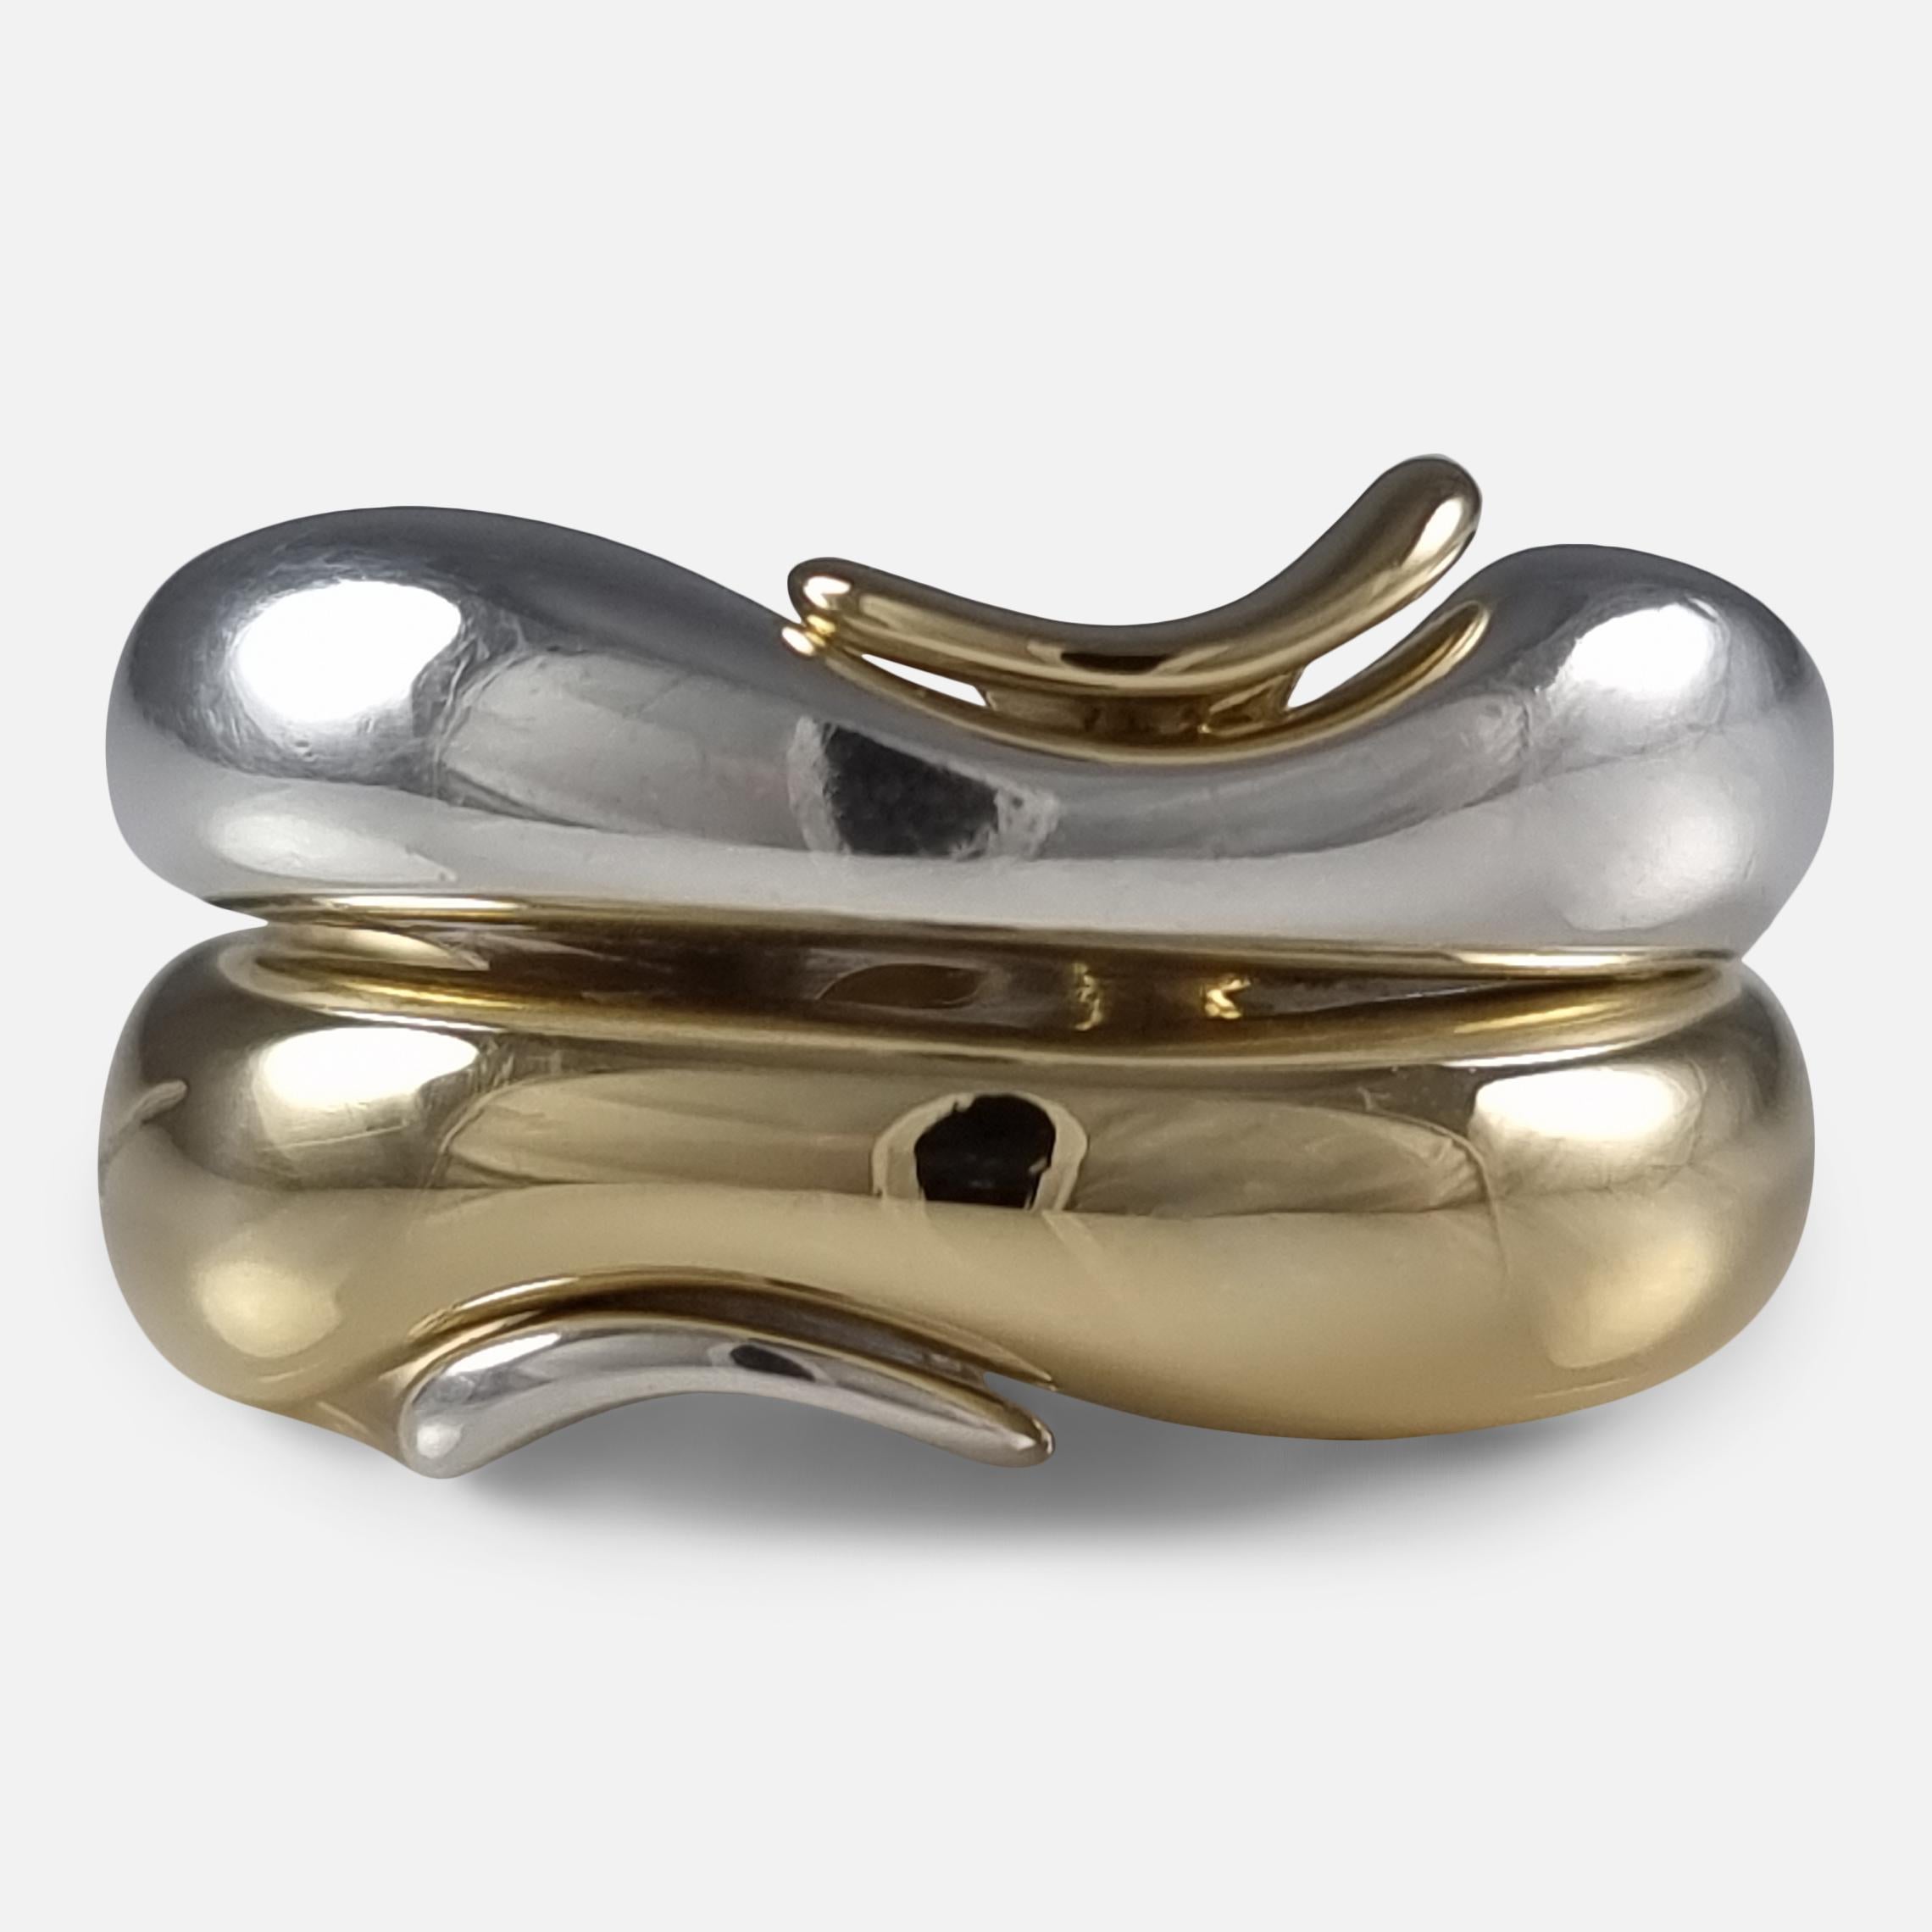 An 18 carat yellow gold and sterling silver puzzle style ring, #1345 & #345, designed by Minas Spiridis for Georg Jensen.

The two part ring is stamped with post 1945 Georg Jensen marks. 

Assay: - One of the rings is hallmarked with Edinburgh